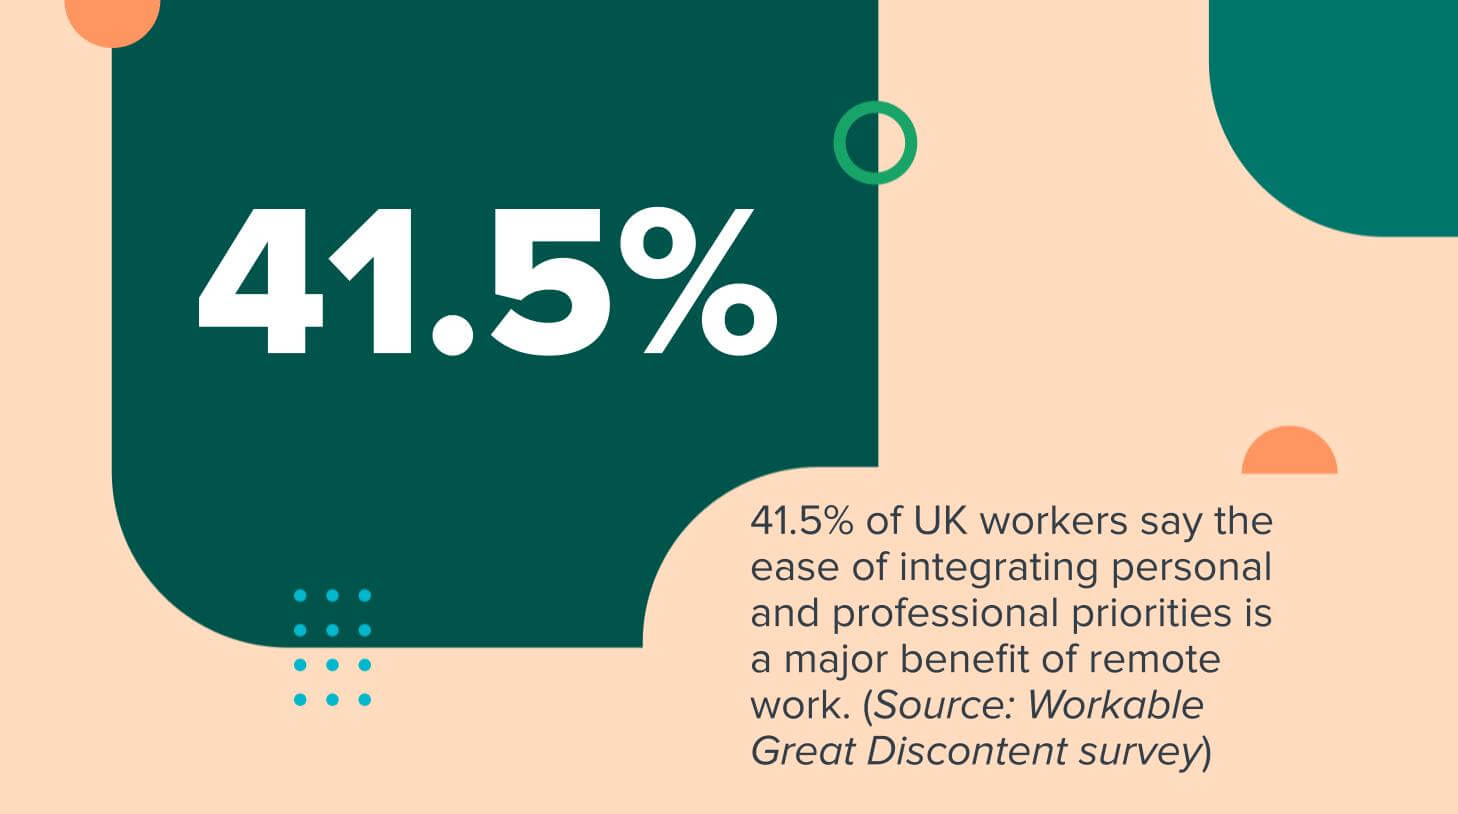 41.5% of UK workers say the ease of integrating personal and professional priorities is a major benefit of remote work. (Source: Workable Great Discontent survey)